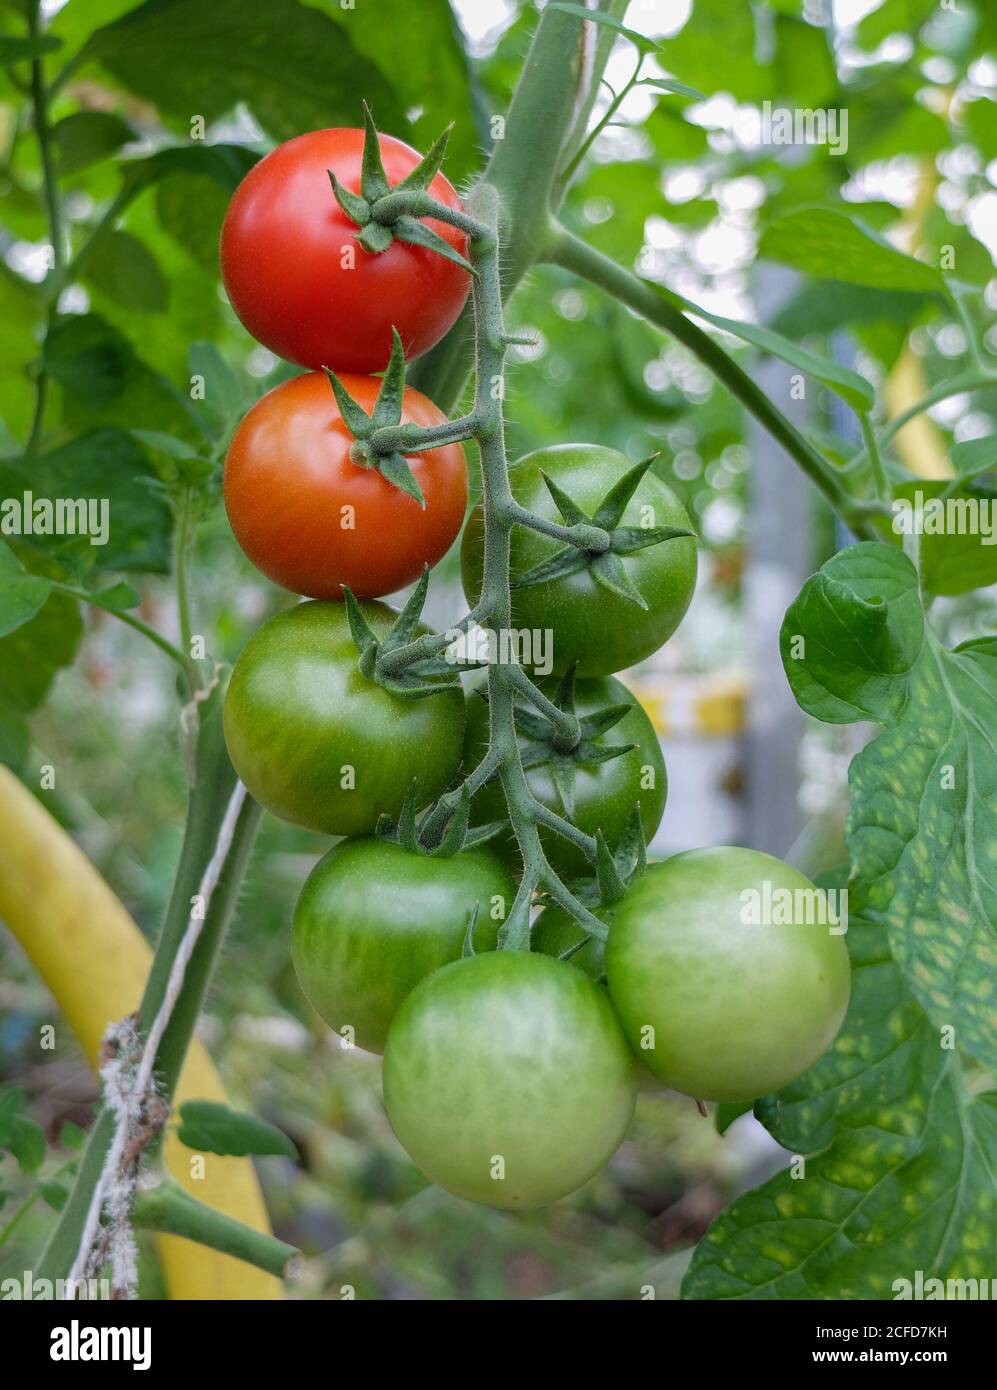 Truss tomatoes ripen in the greenhouse Stock Photo